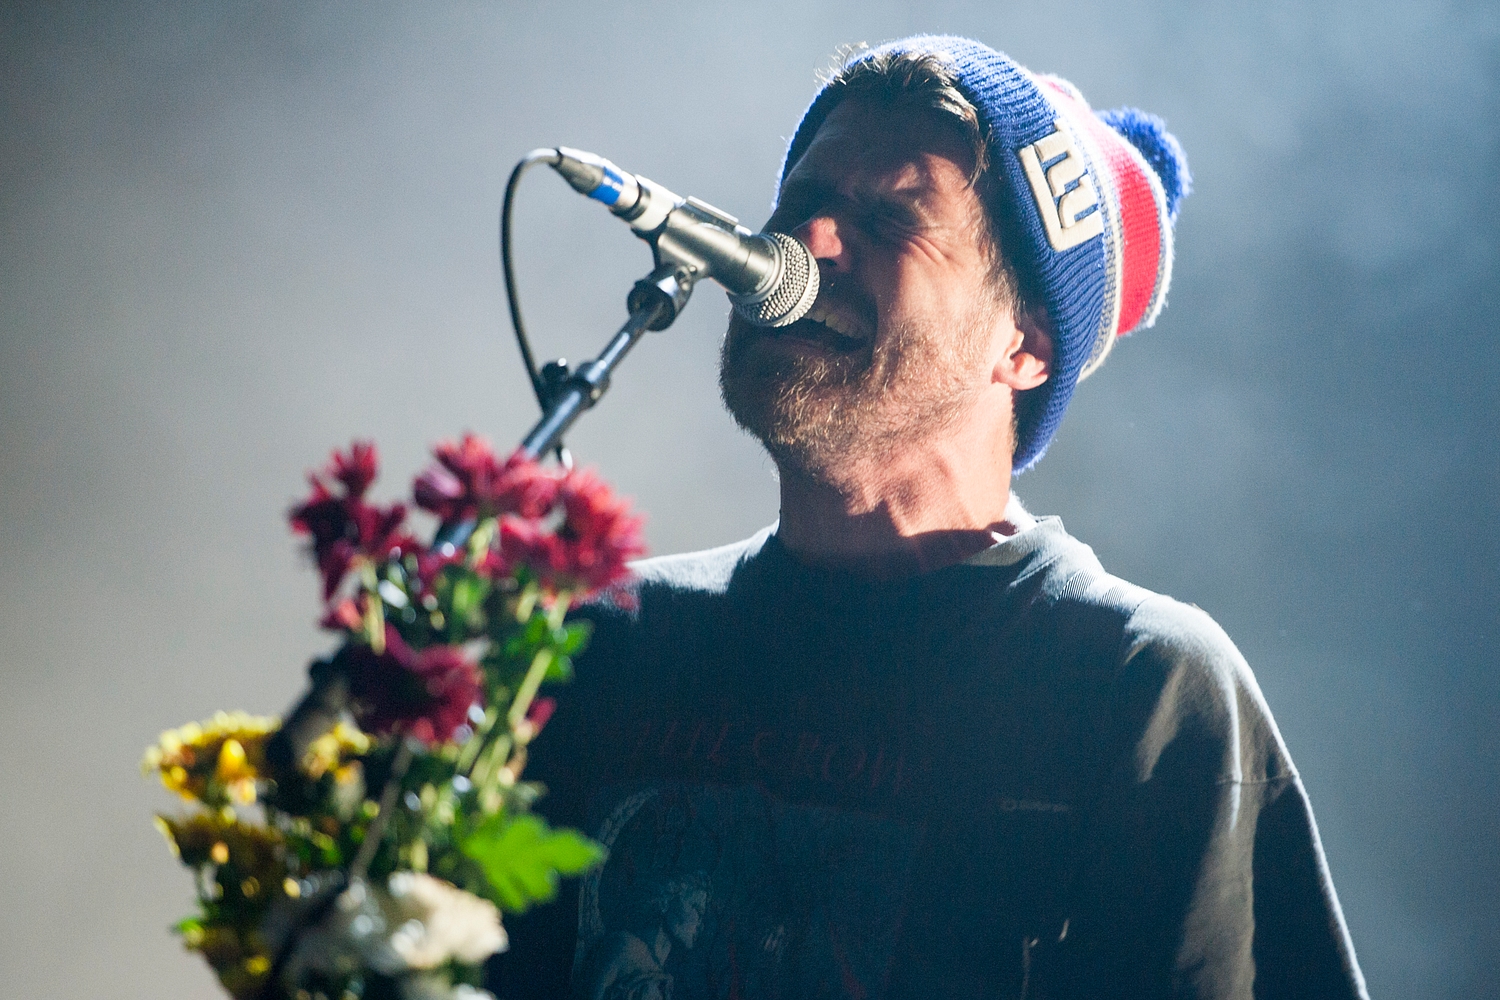 Brand New’s Jesse Lacey is releasing new material with Kevin Devine